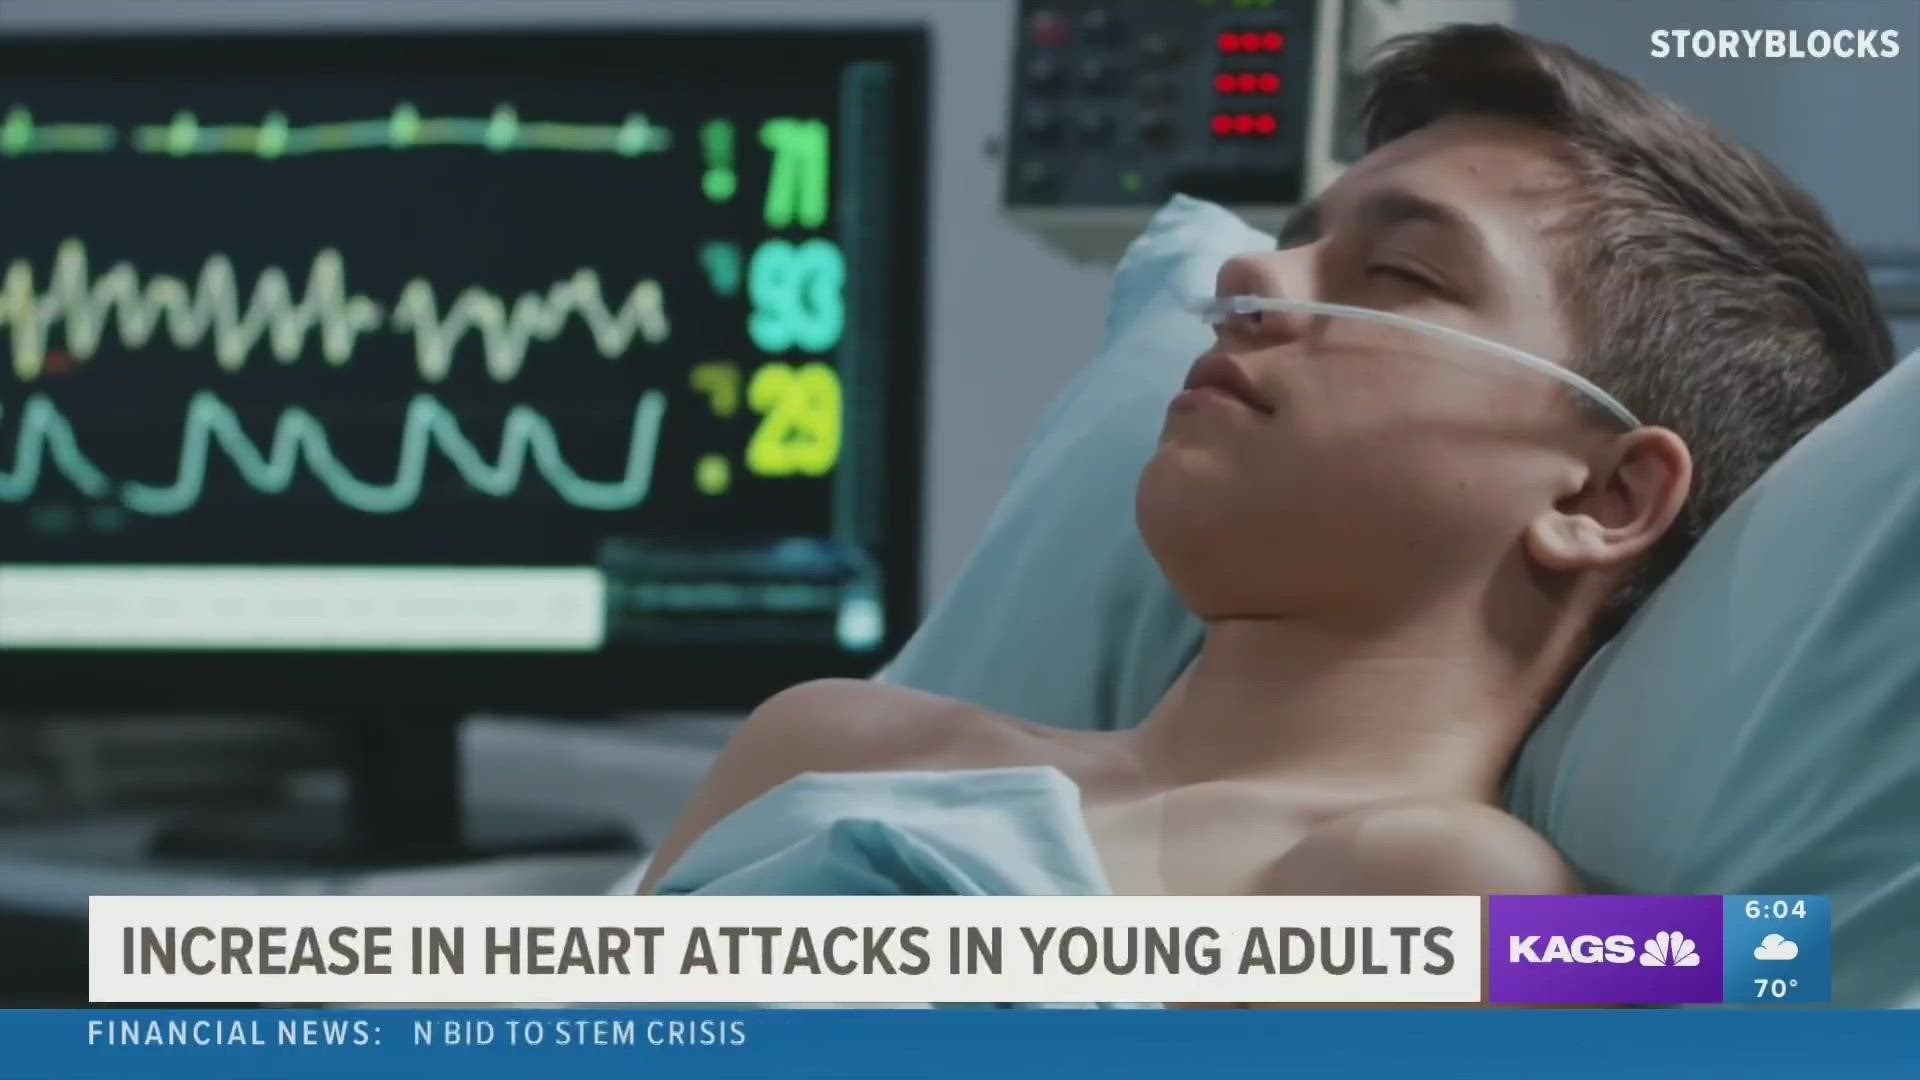 According to the American College of Cardiology, the percentage of young people having a heart attack has been increasing by 2% each year for the last 10 years.